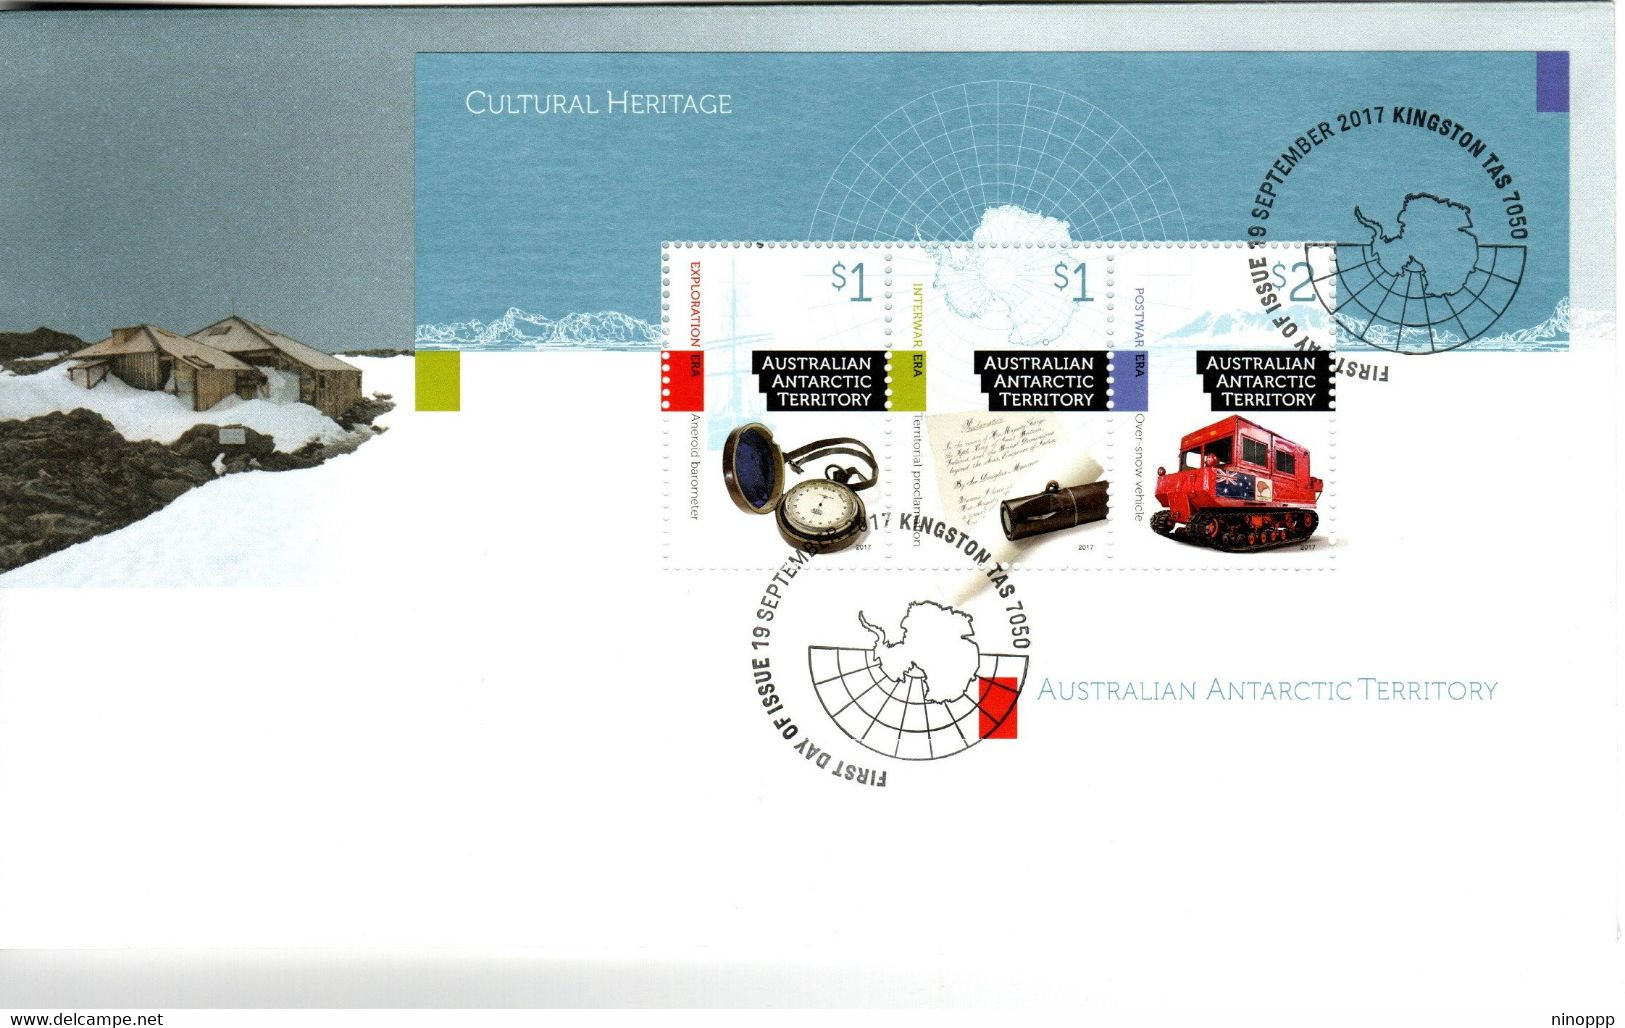 Australian Antarctic Territory 2017 Cultural Heritage,Souvenir Sheet, First Day Cover - FDC